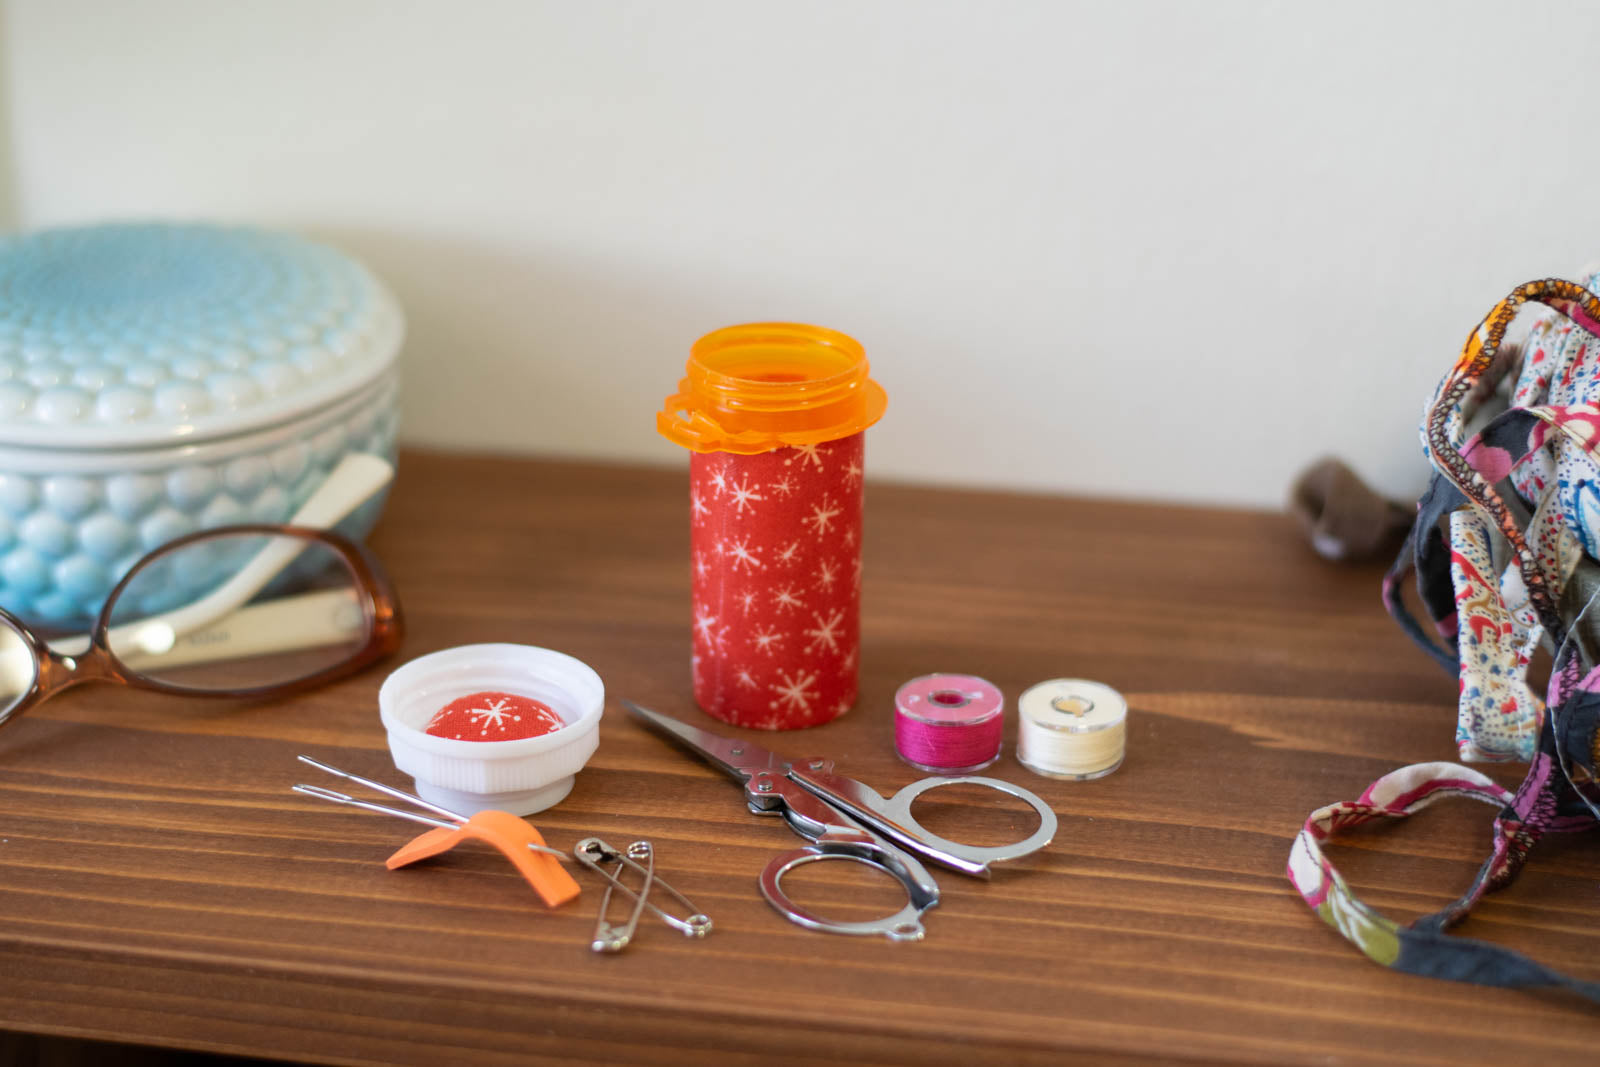 upcycled prescription bottle sewing kit — white sparkles on red, 3.25" high, open with contents